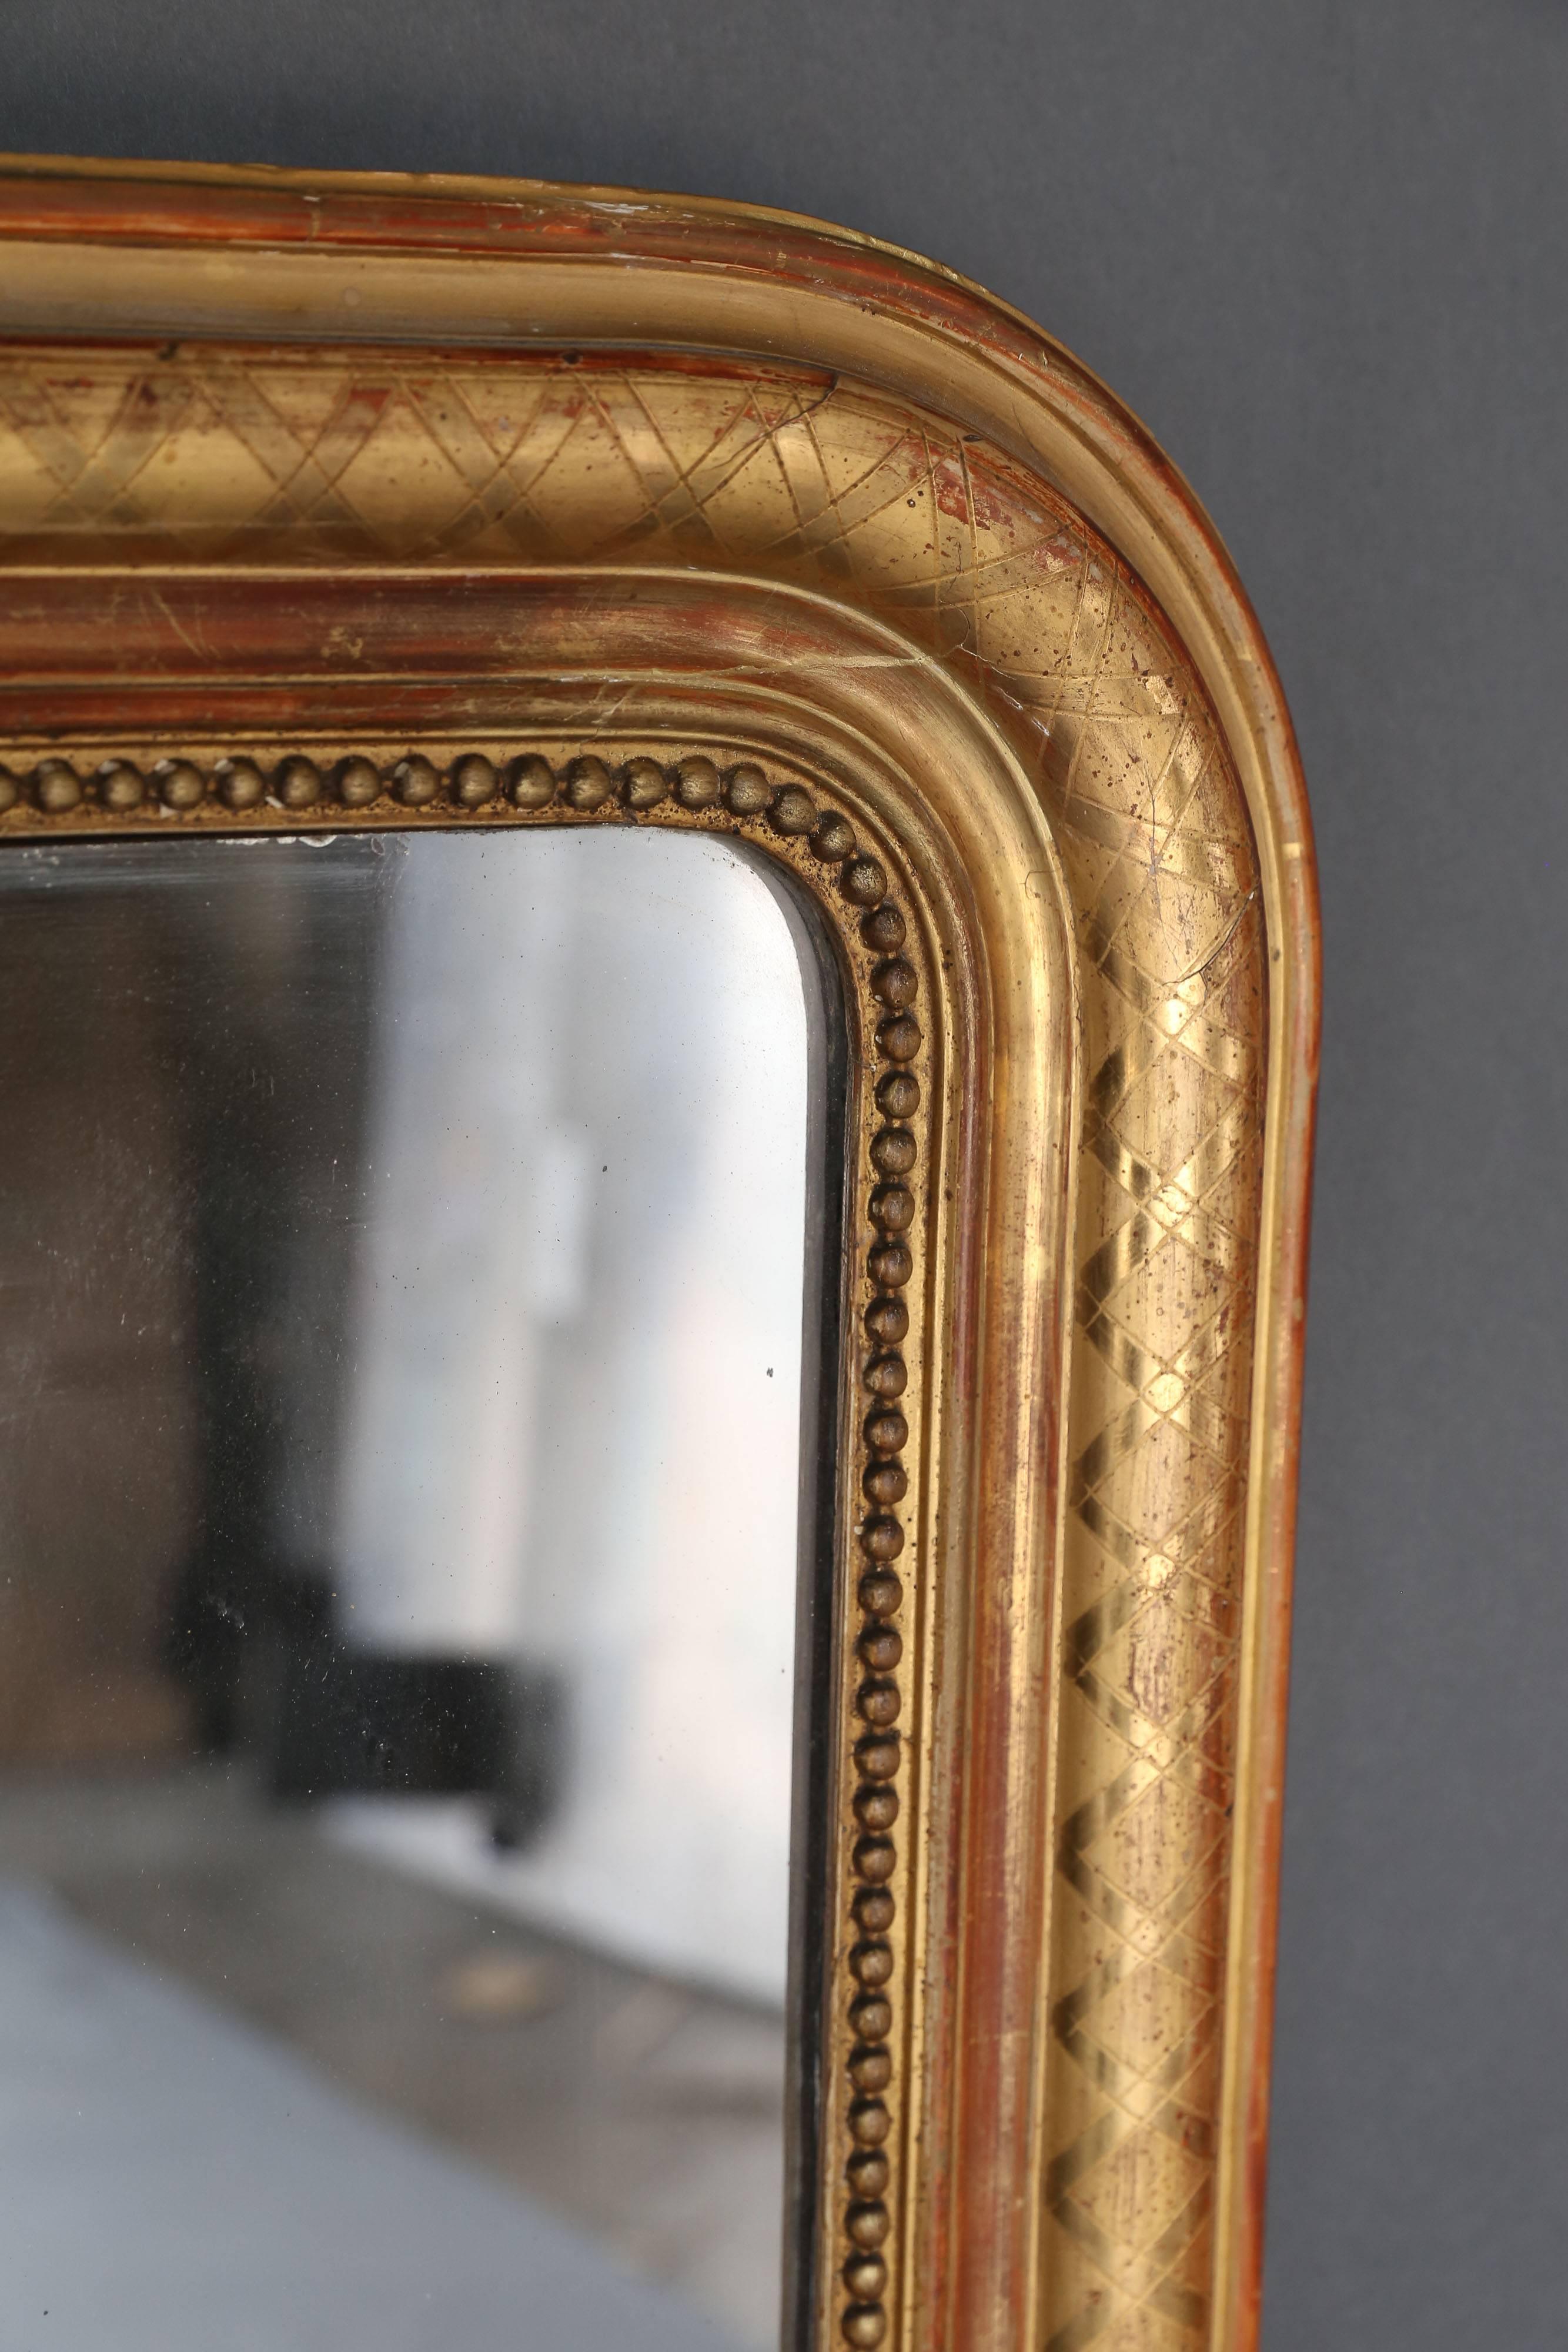 19th century Louis Philippe gilt mirror with pearl detail inside perimeter. Rounded corners on top and squared corners at the bottom. Architectural criss-cross detail etched on the gilt perimeter. Original mercury glass mirror.